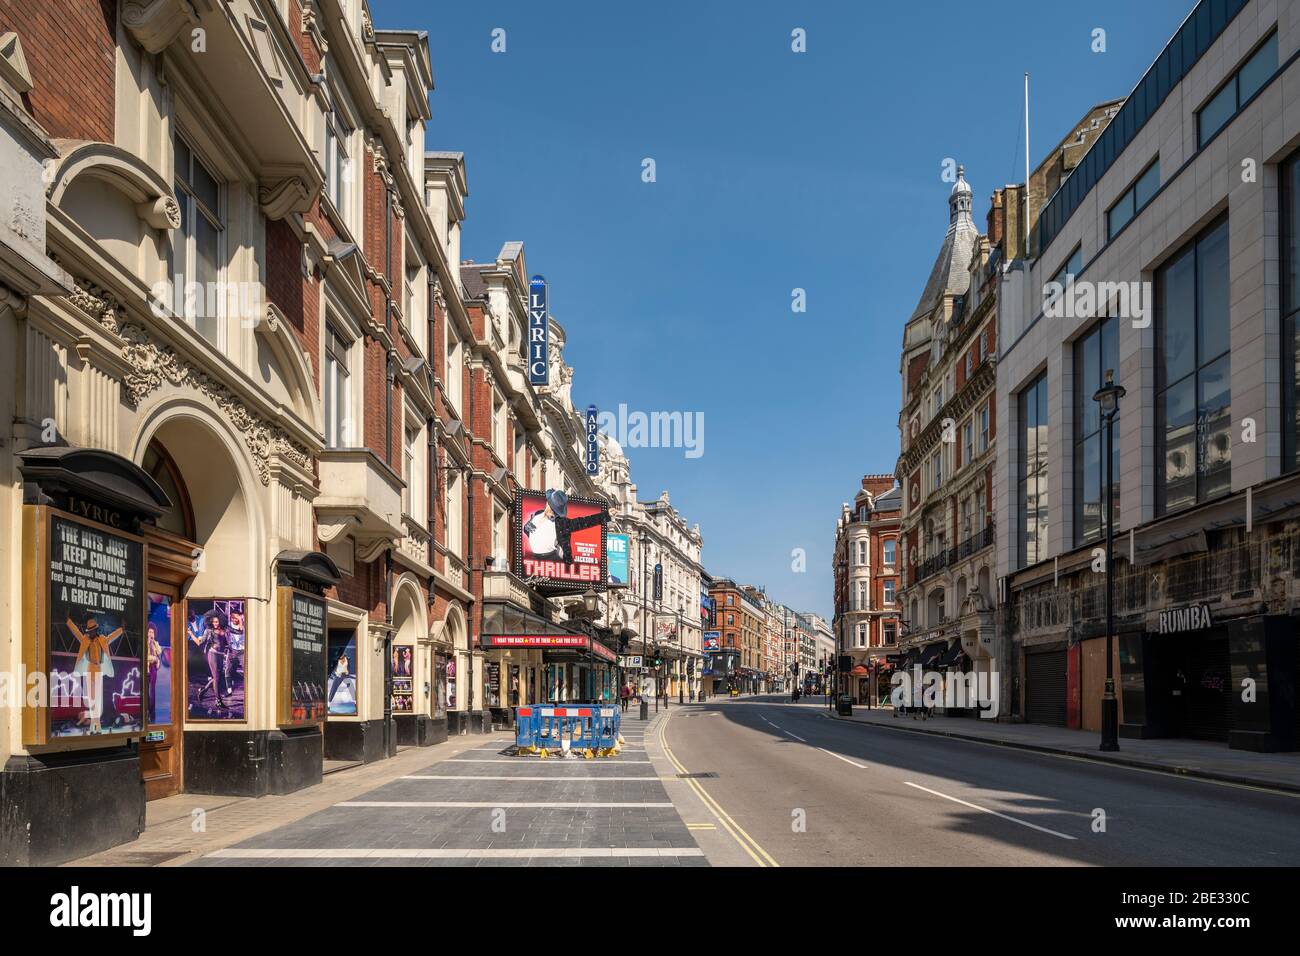 West-end of London theatre district street empty and quiet during the enforced lockdown due to the covid 19 coronavirus flu pandemic outbreak Stock Photo